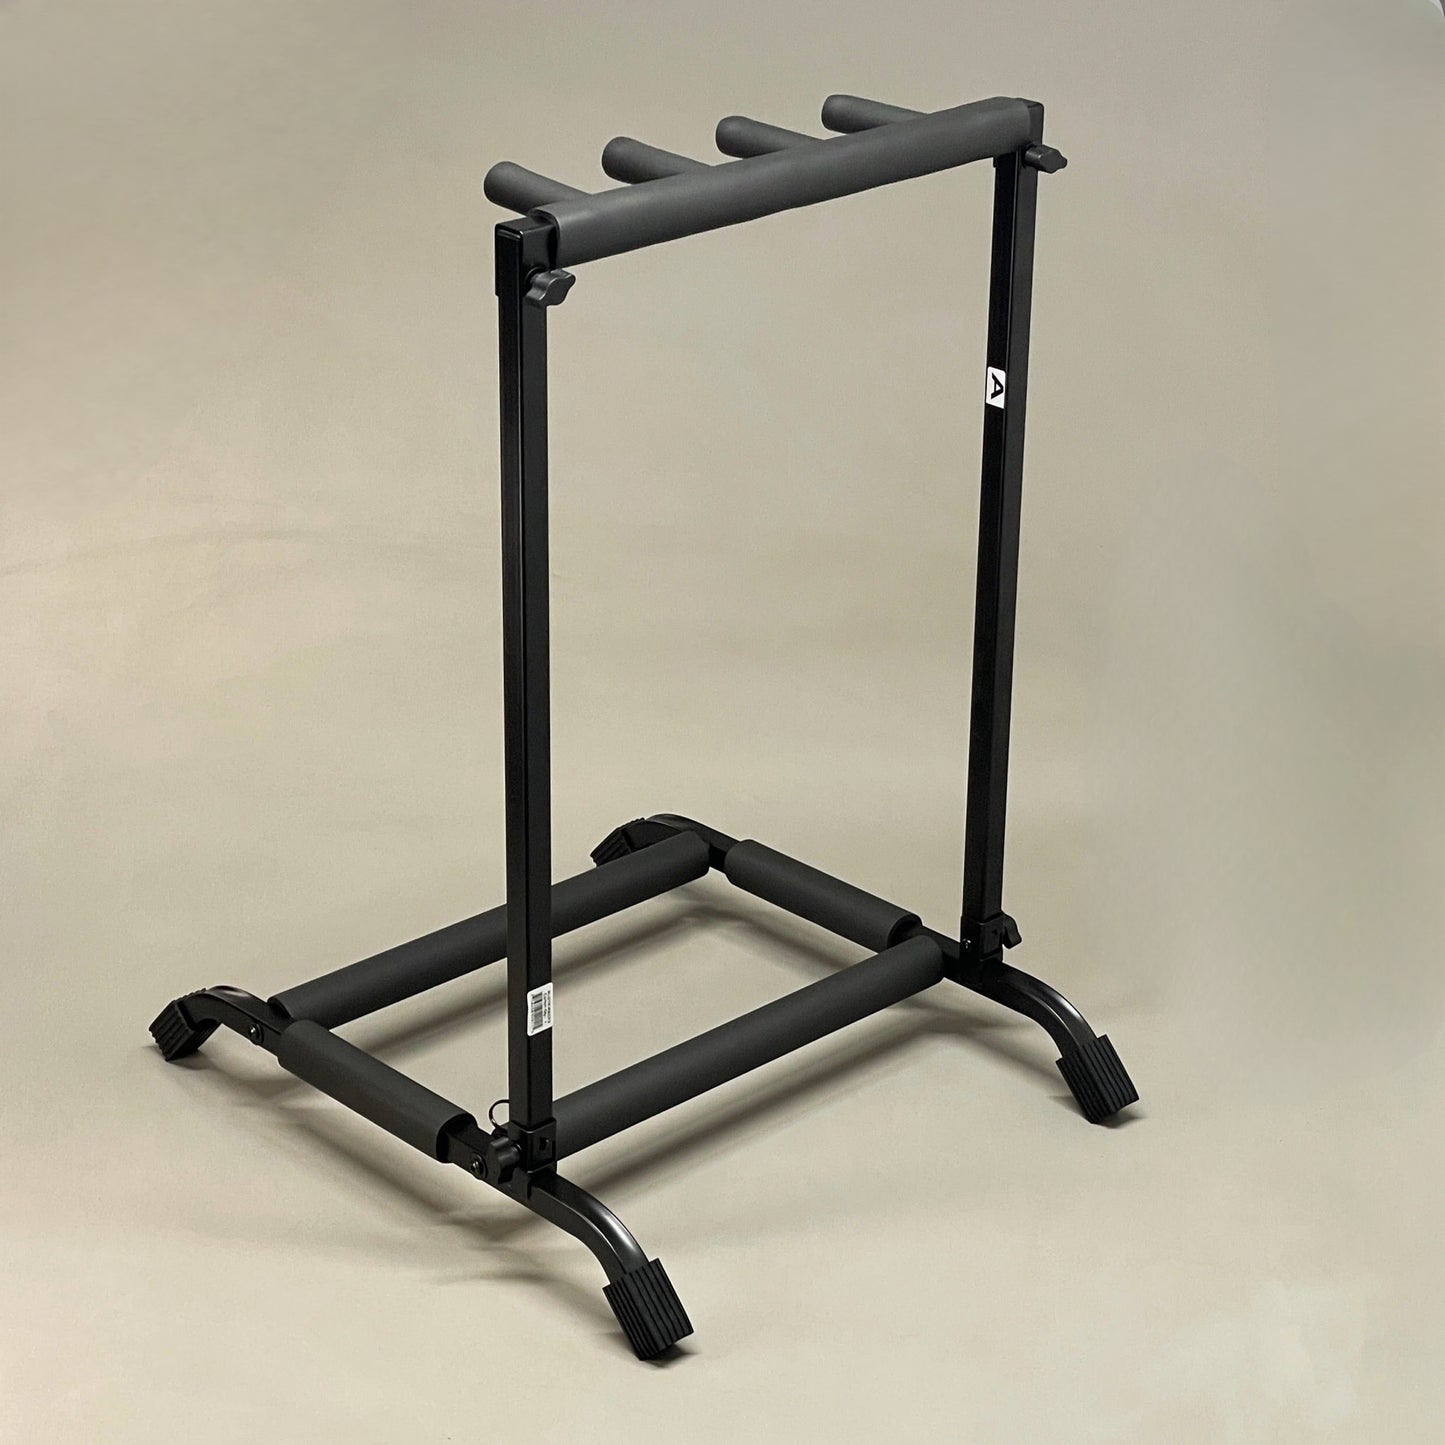 ROK-IT Collapsible Guitar Rack for 3 Guitars Acoustic or Electric Black RI-GTR-RACK3 (New)